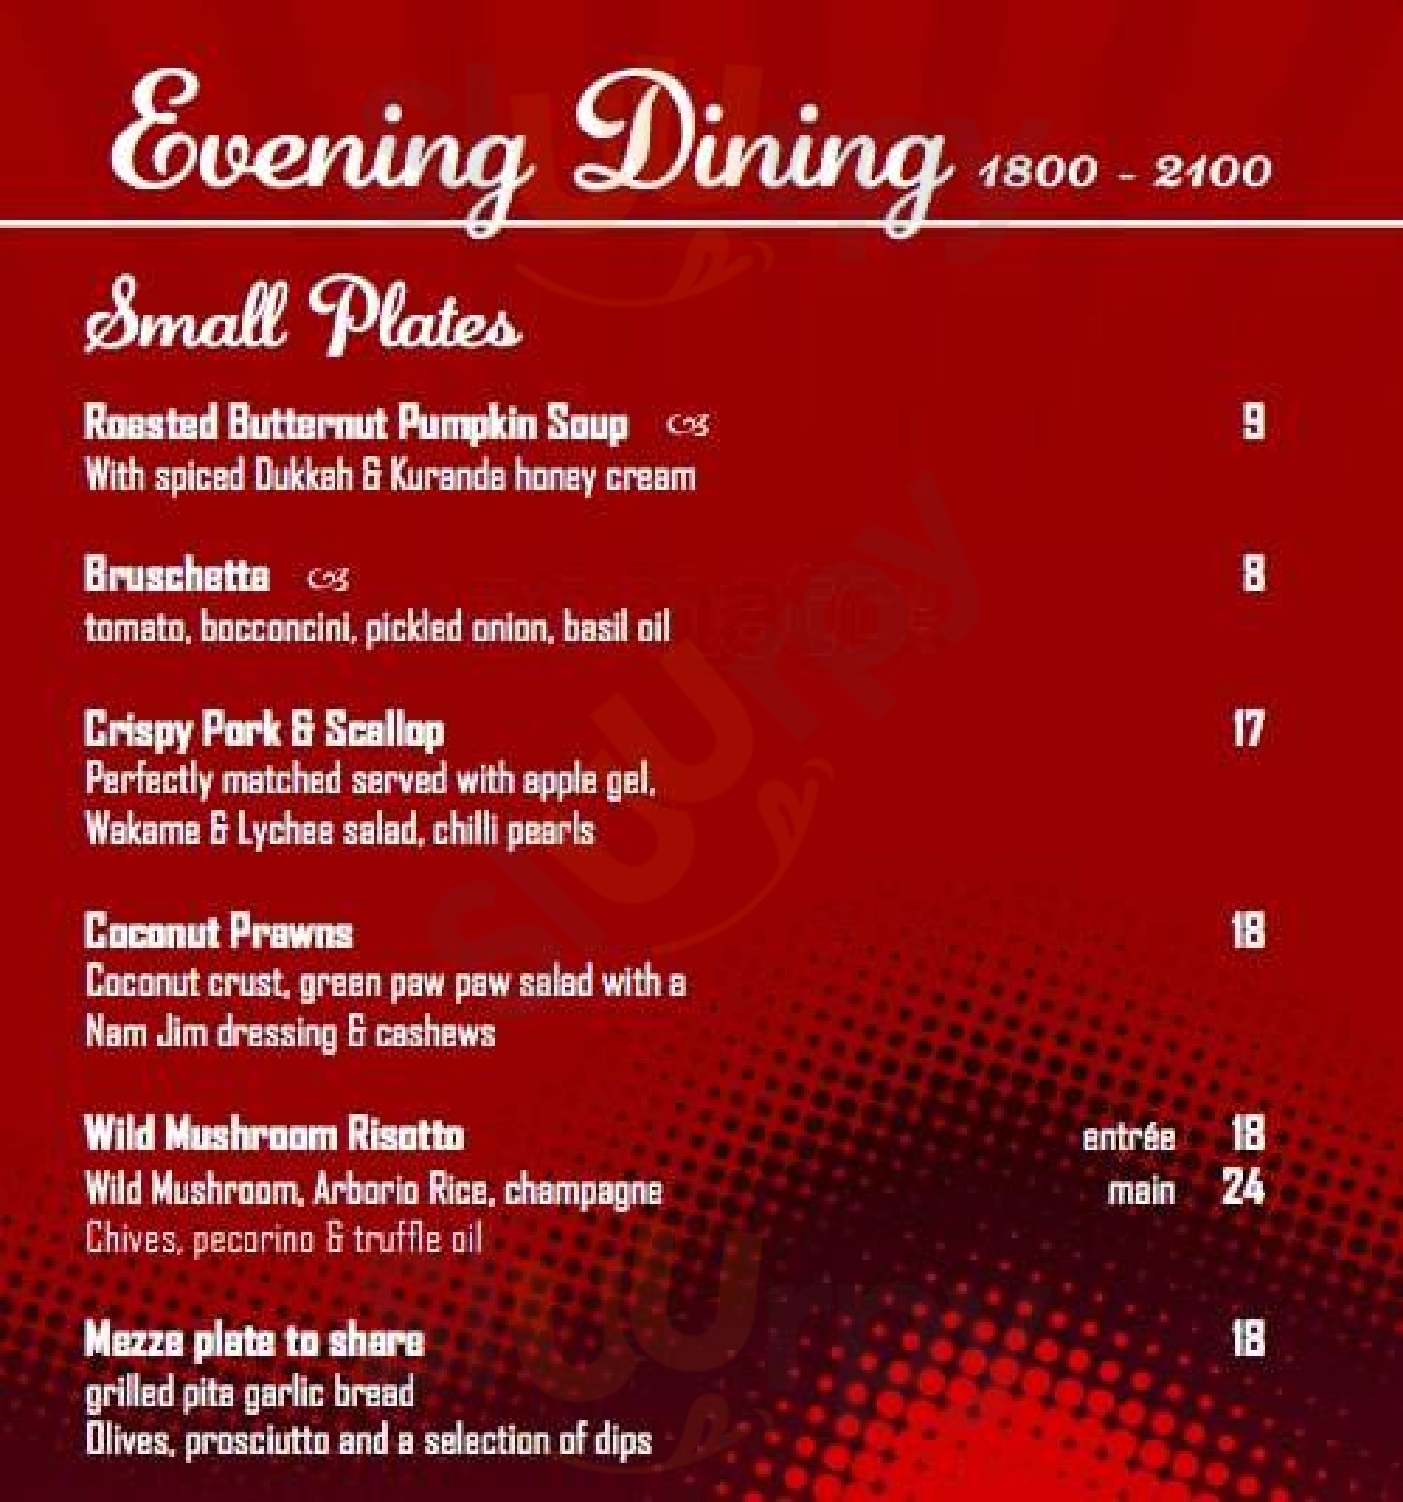 Coral Hedge Brassiere Restaurant And Bar Cairns Menu - 1